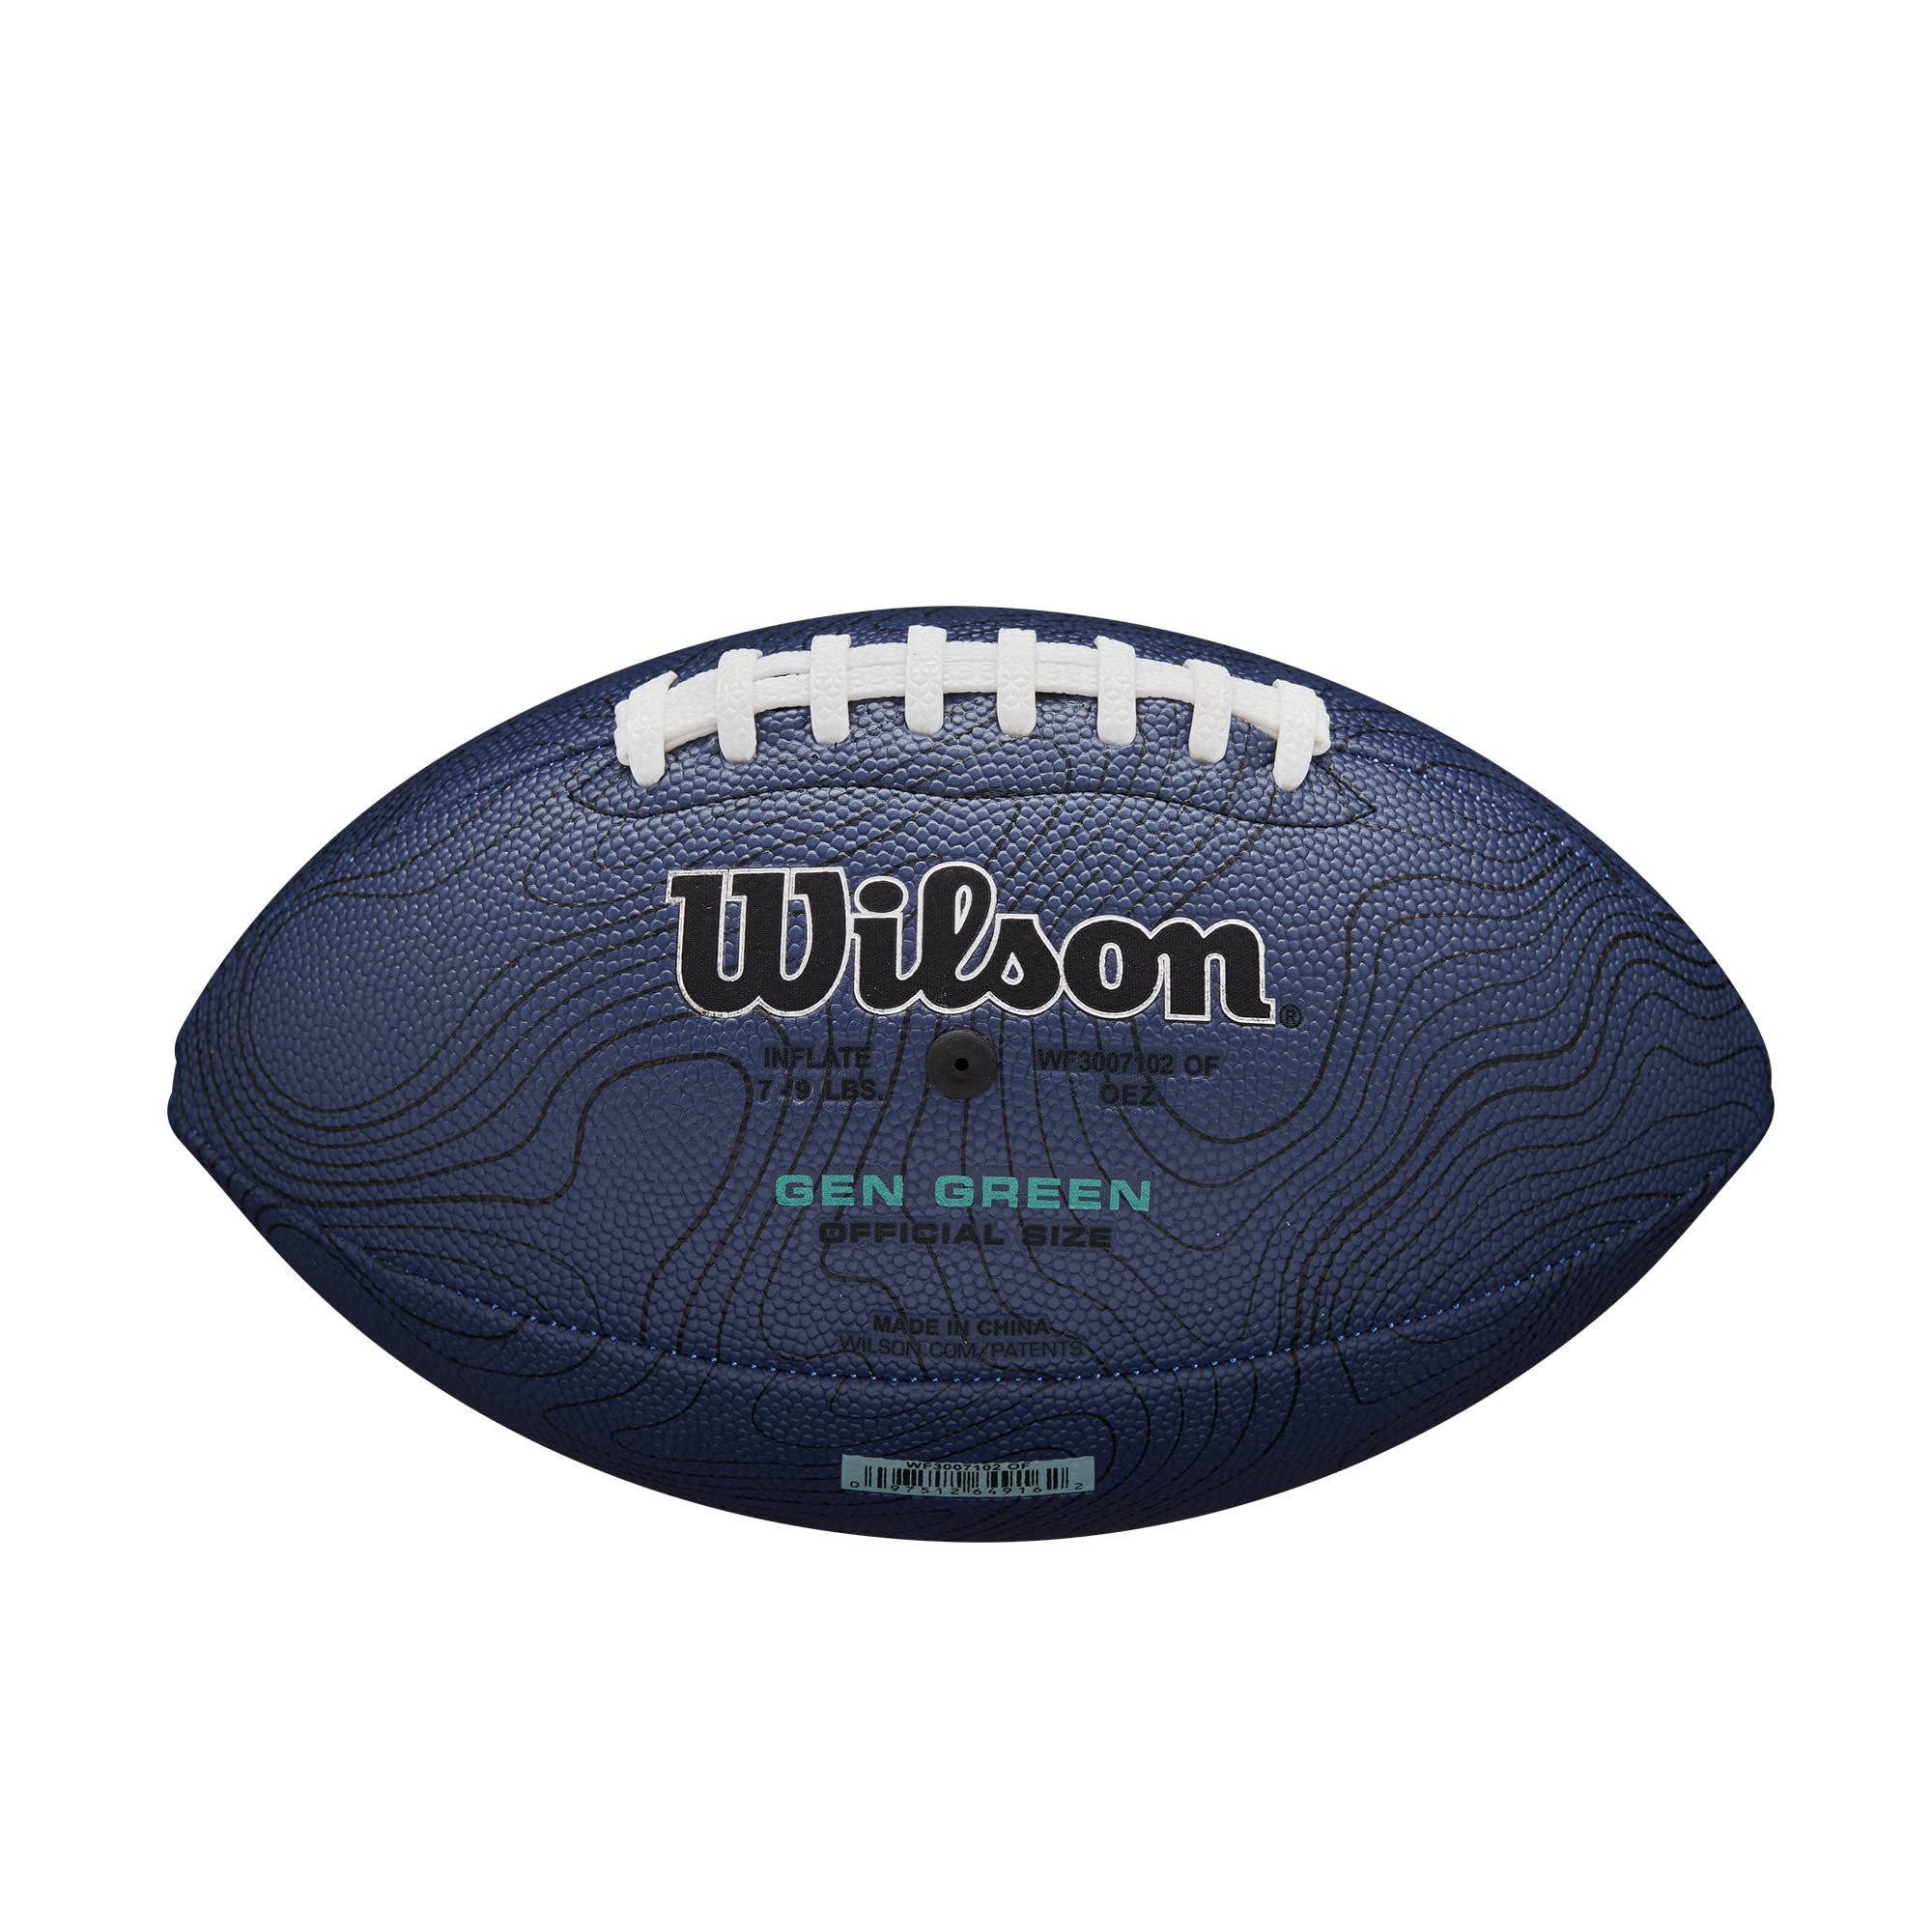 WILSON NFL Stride Pro Eco Football - Navy, Official Size